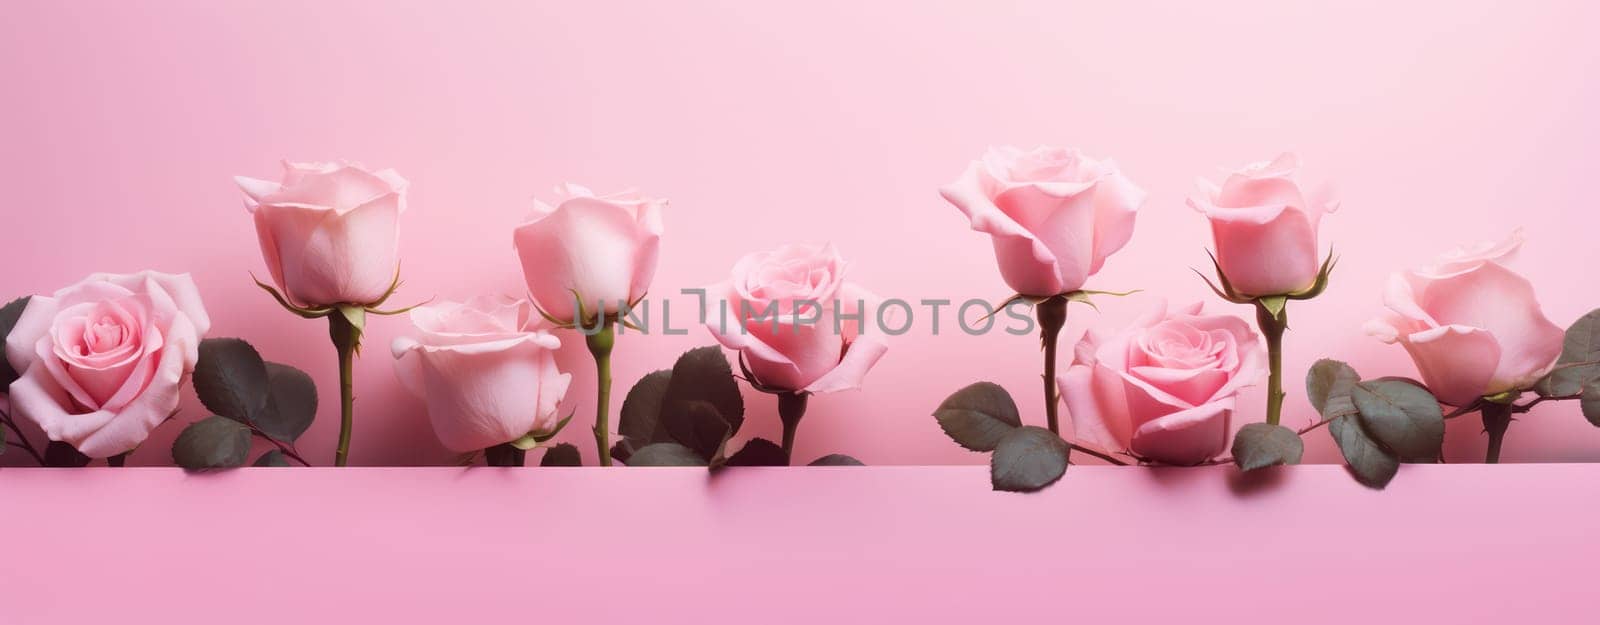 Romantic Blossoming Beauty: A Floral Love Bouquet on a Pink Spring Background